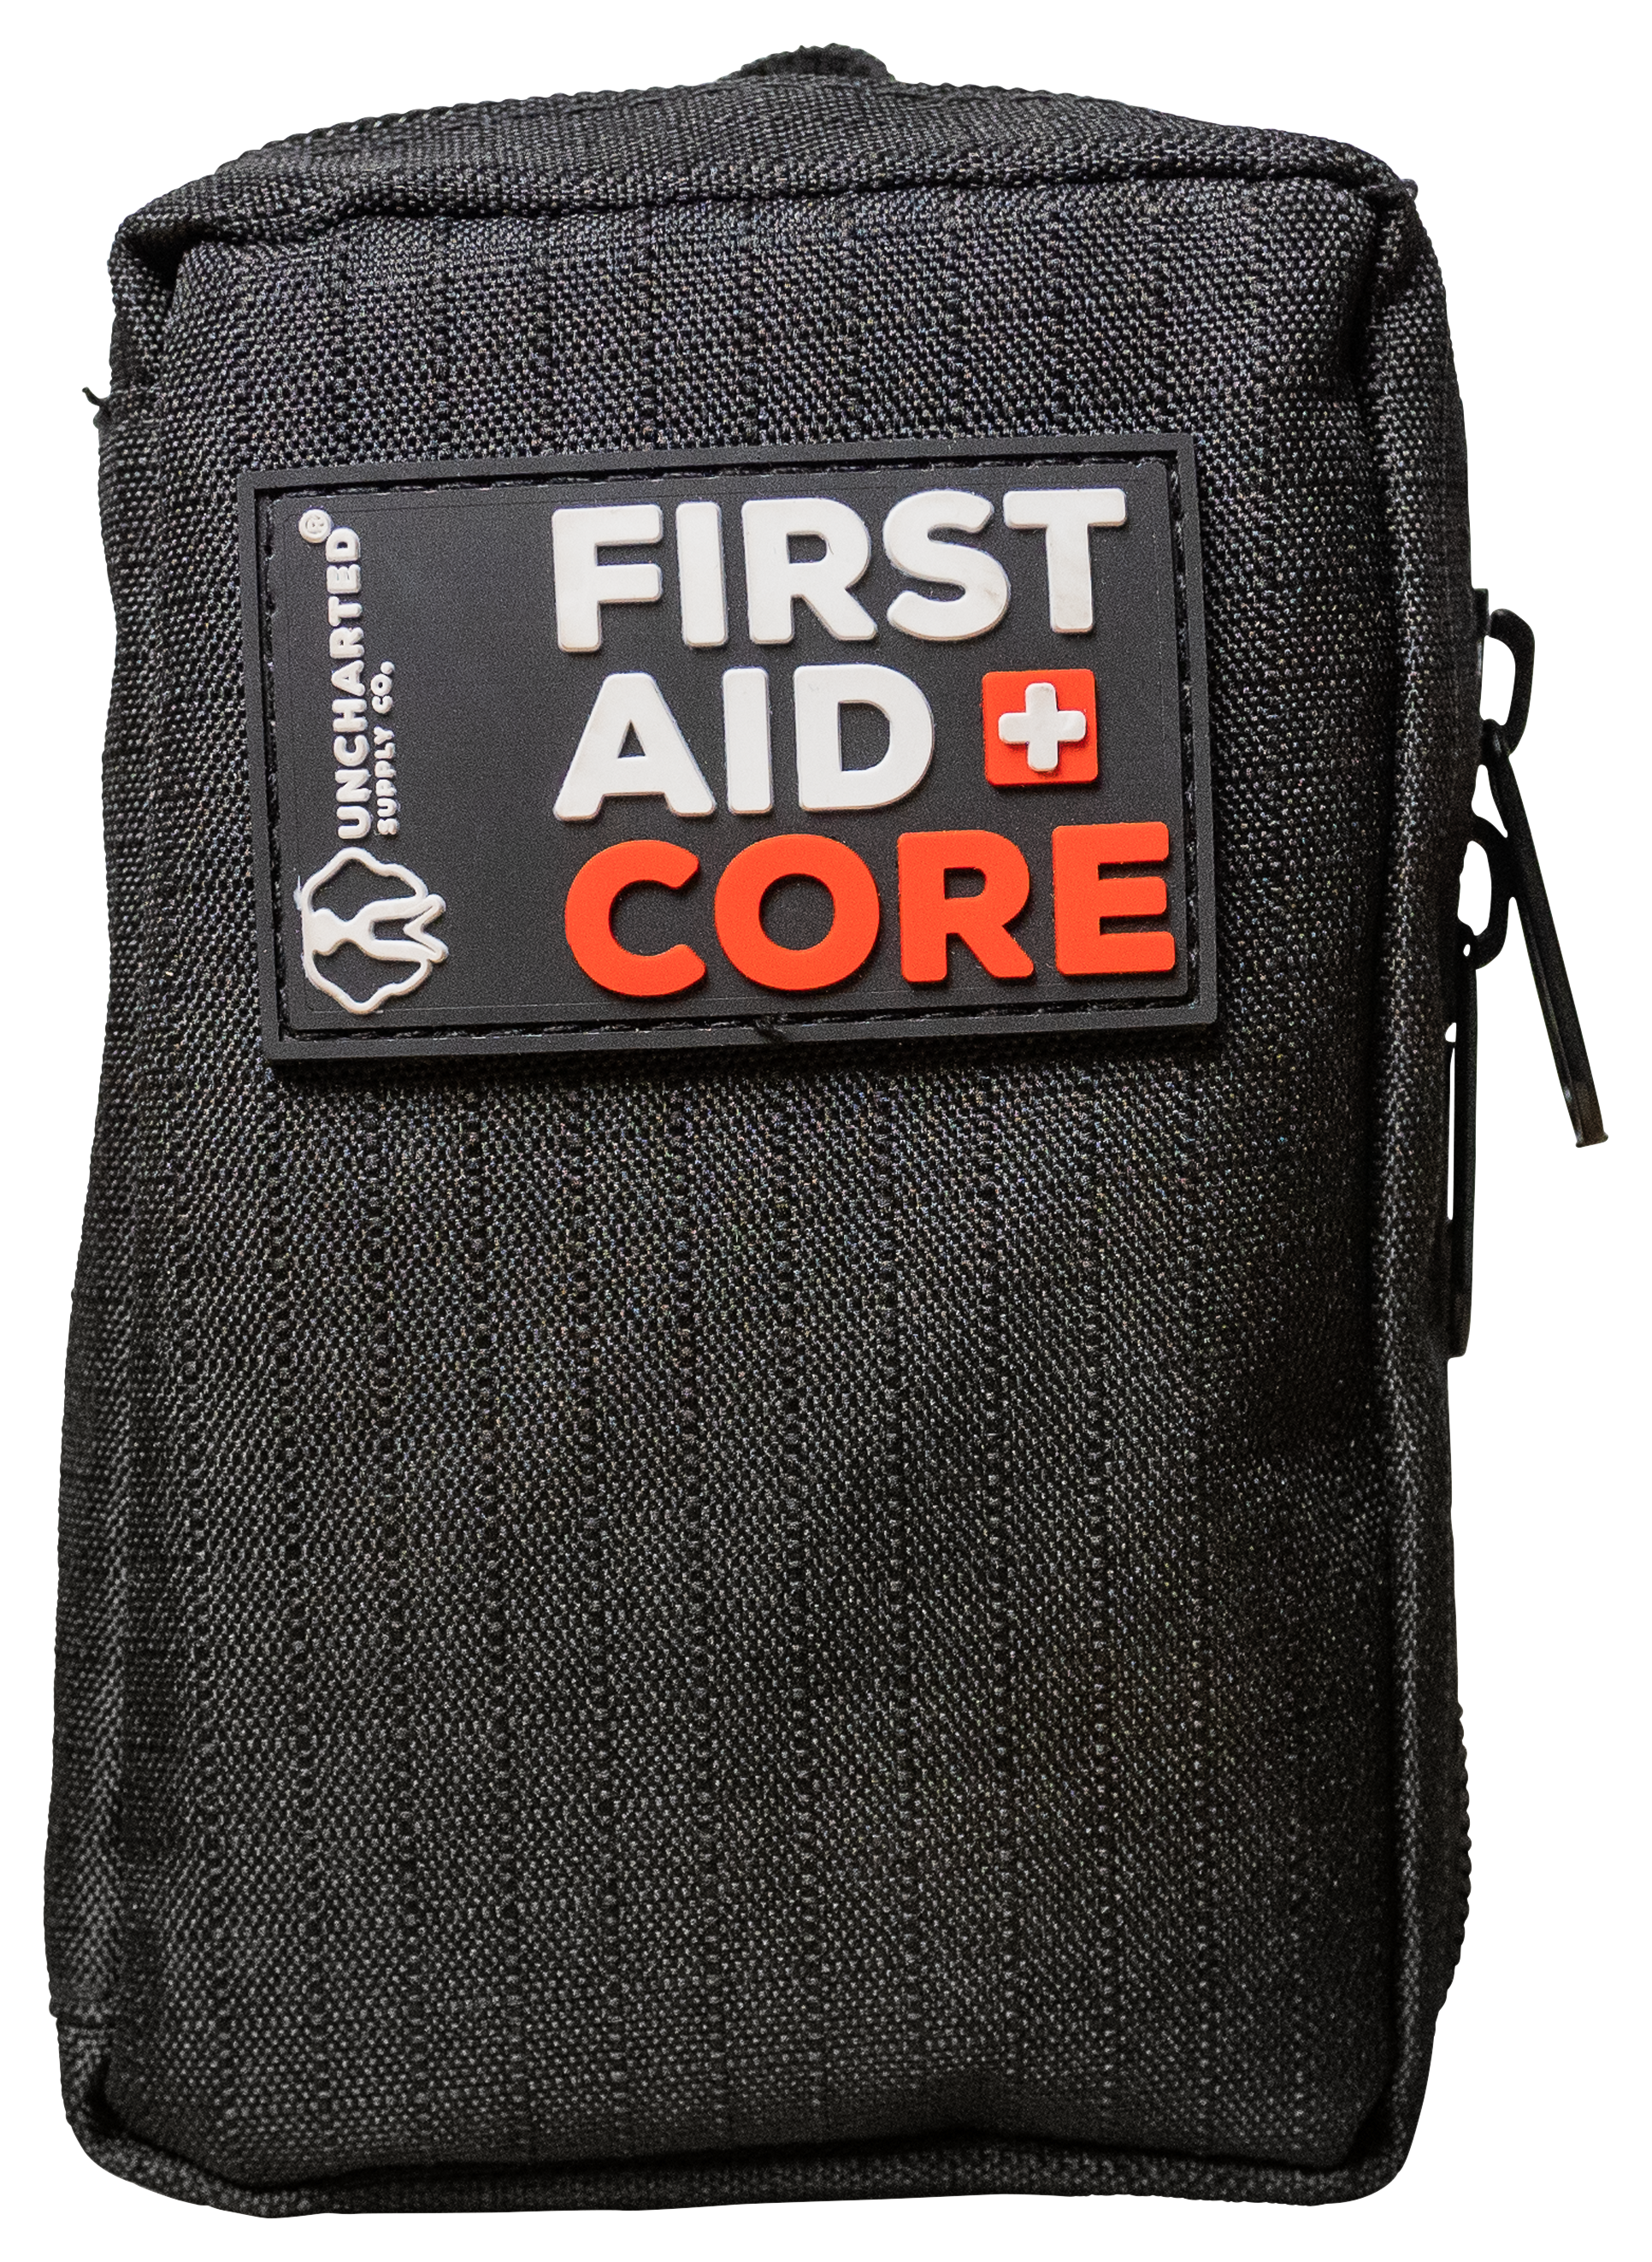 Uncharted Supply Co. First Aid Core Kit | Bass Pro Shops